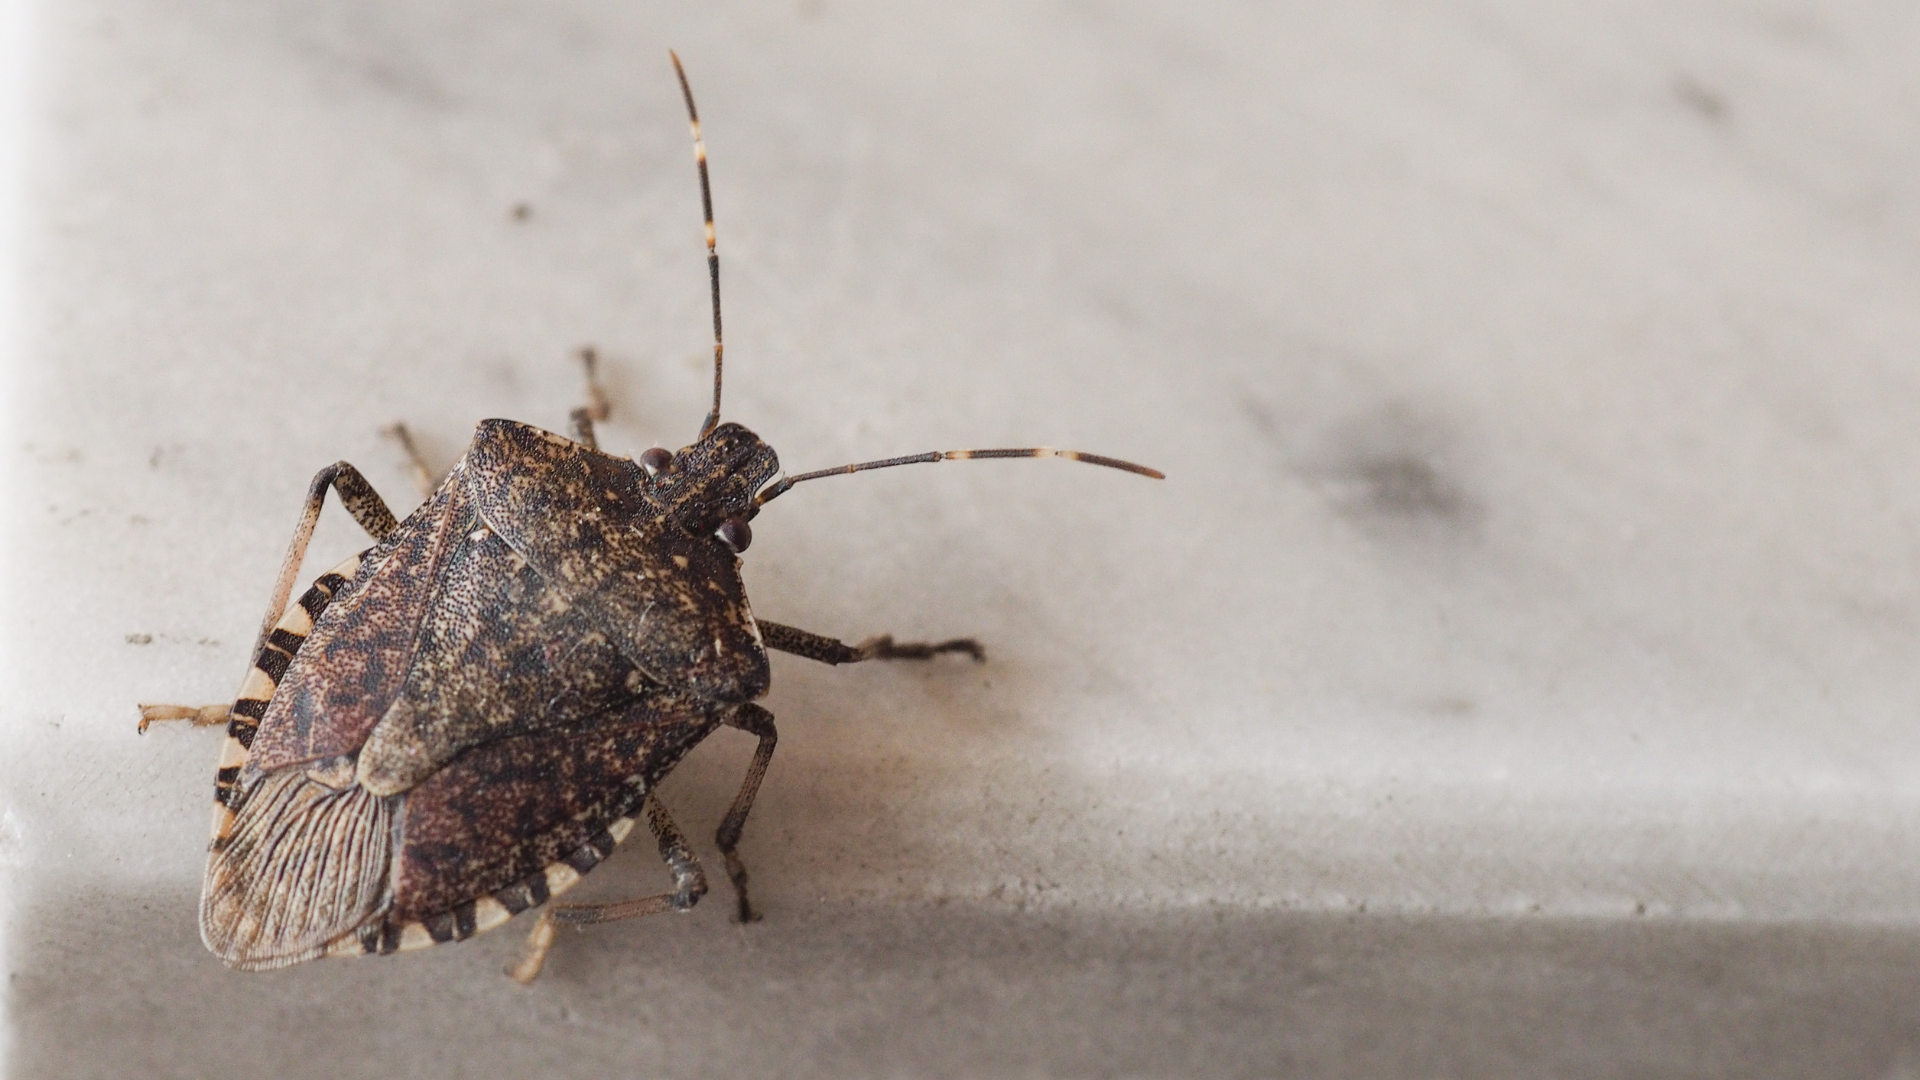 stink bugs enter residential homes is in search of warmth.